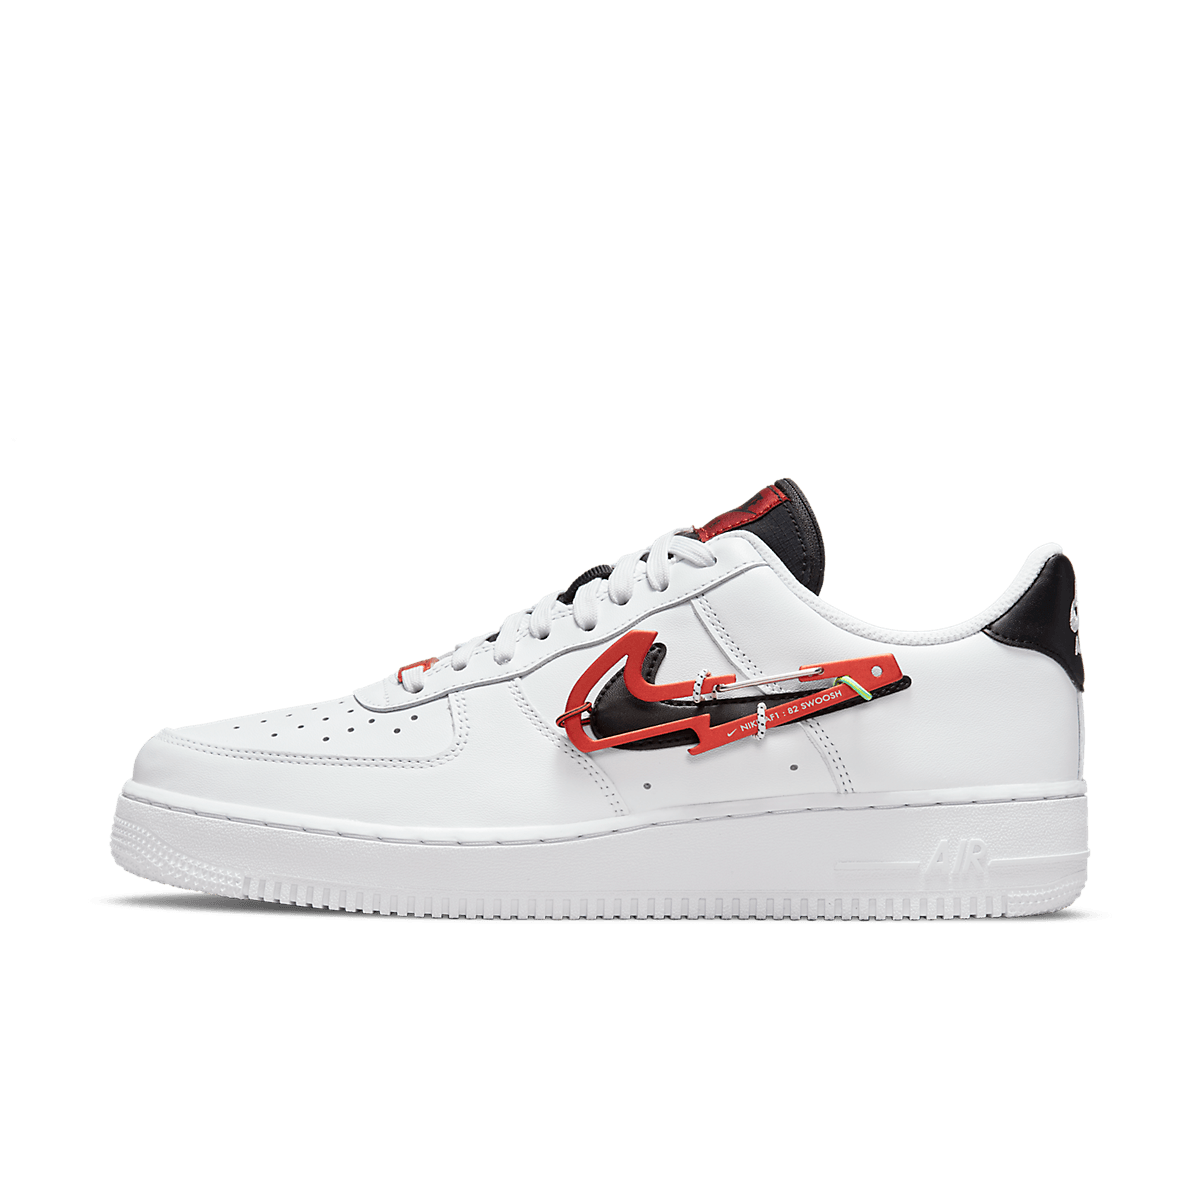 Nike Air Force 1 'White' - Carabiner Pack DH7579-100